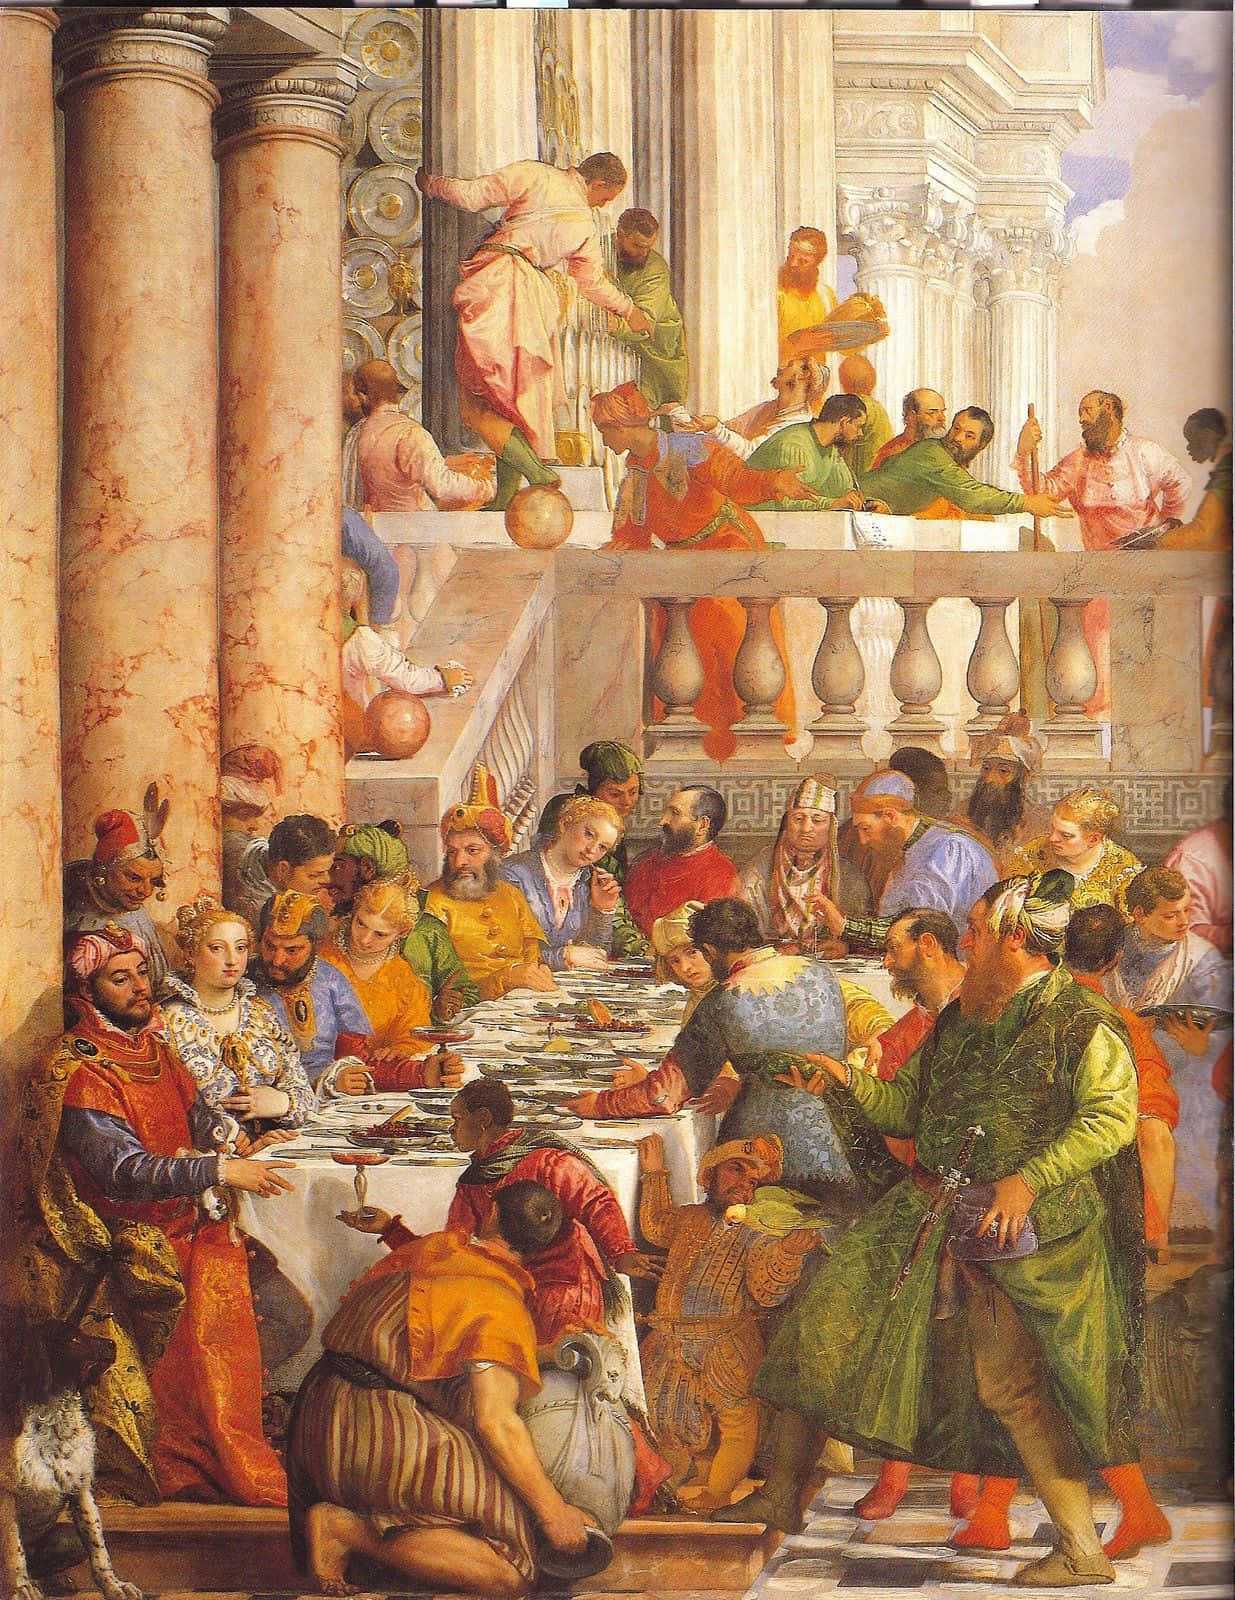 A Painting Of People Eating In A Restaurant